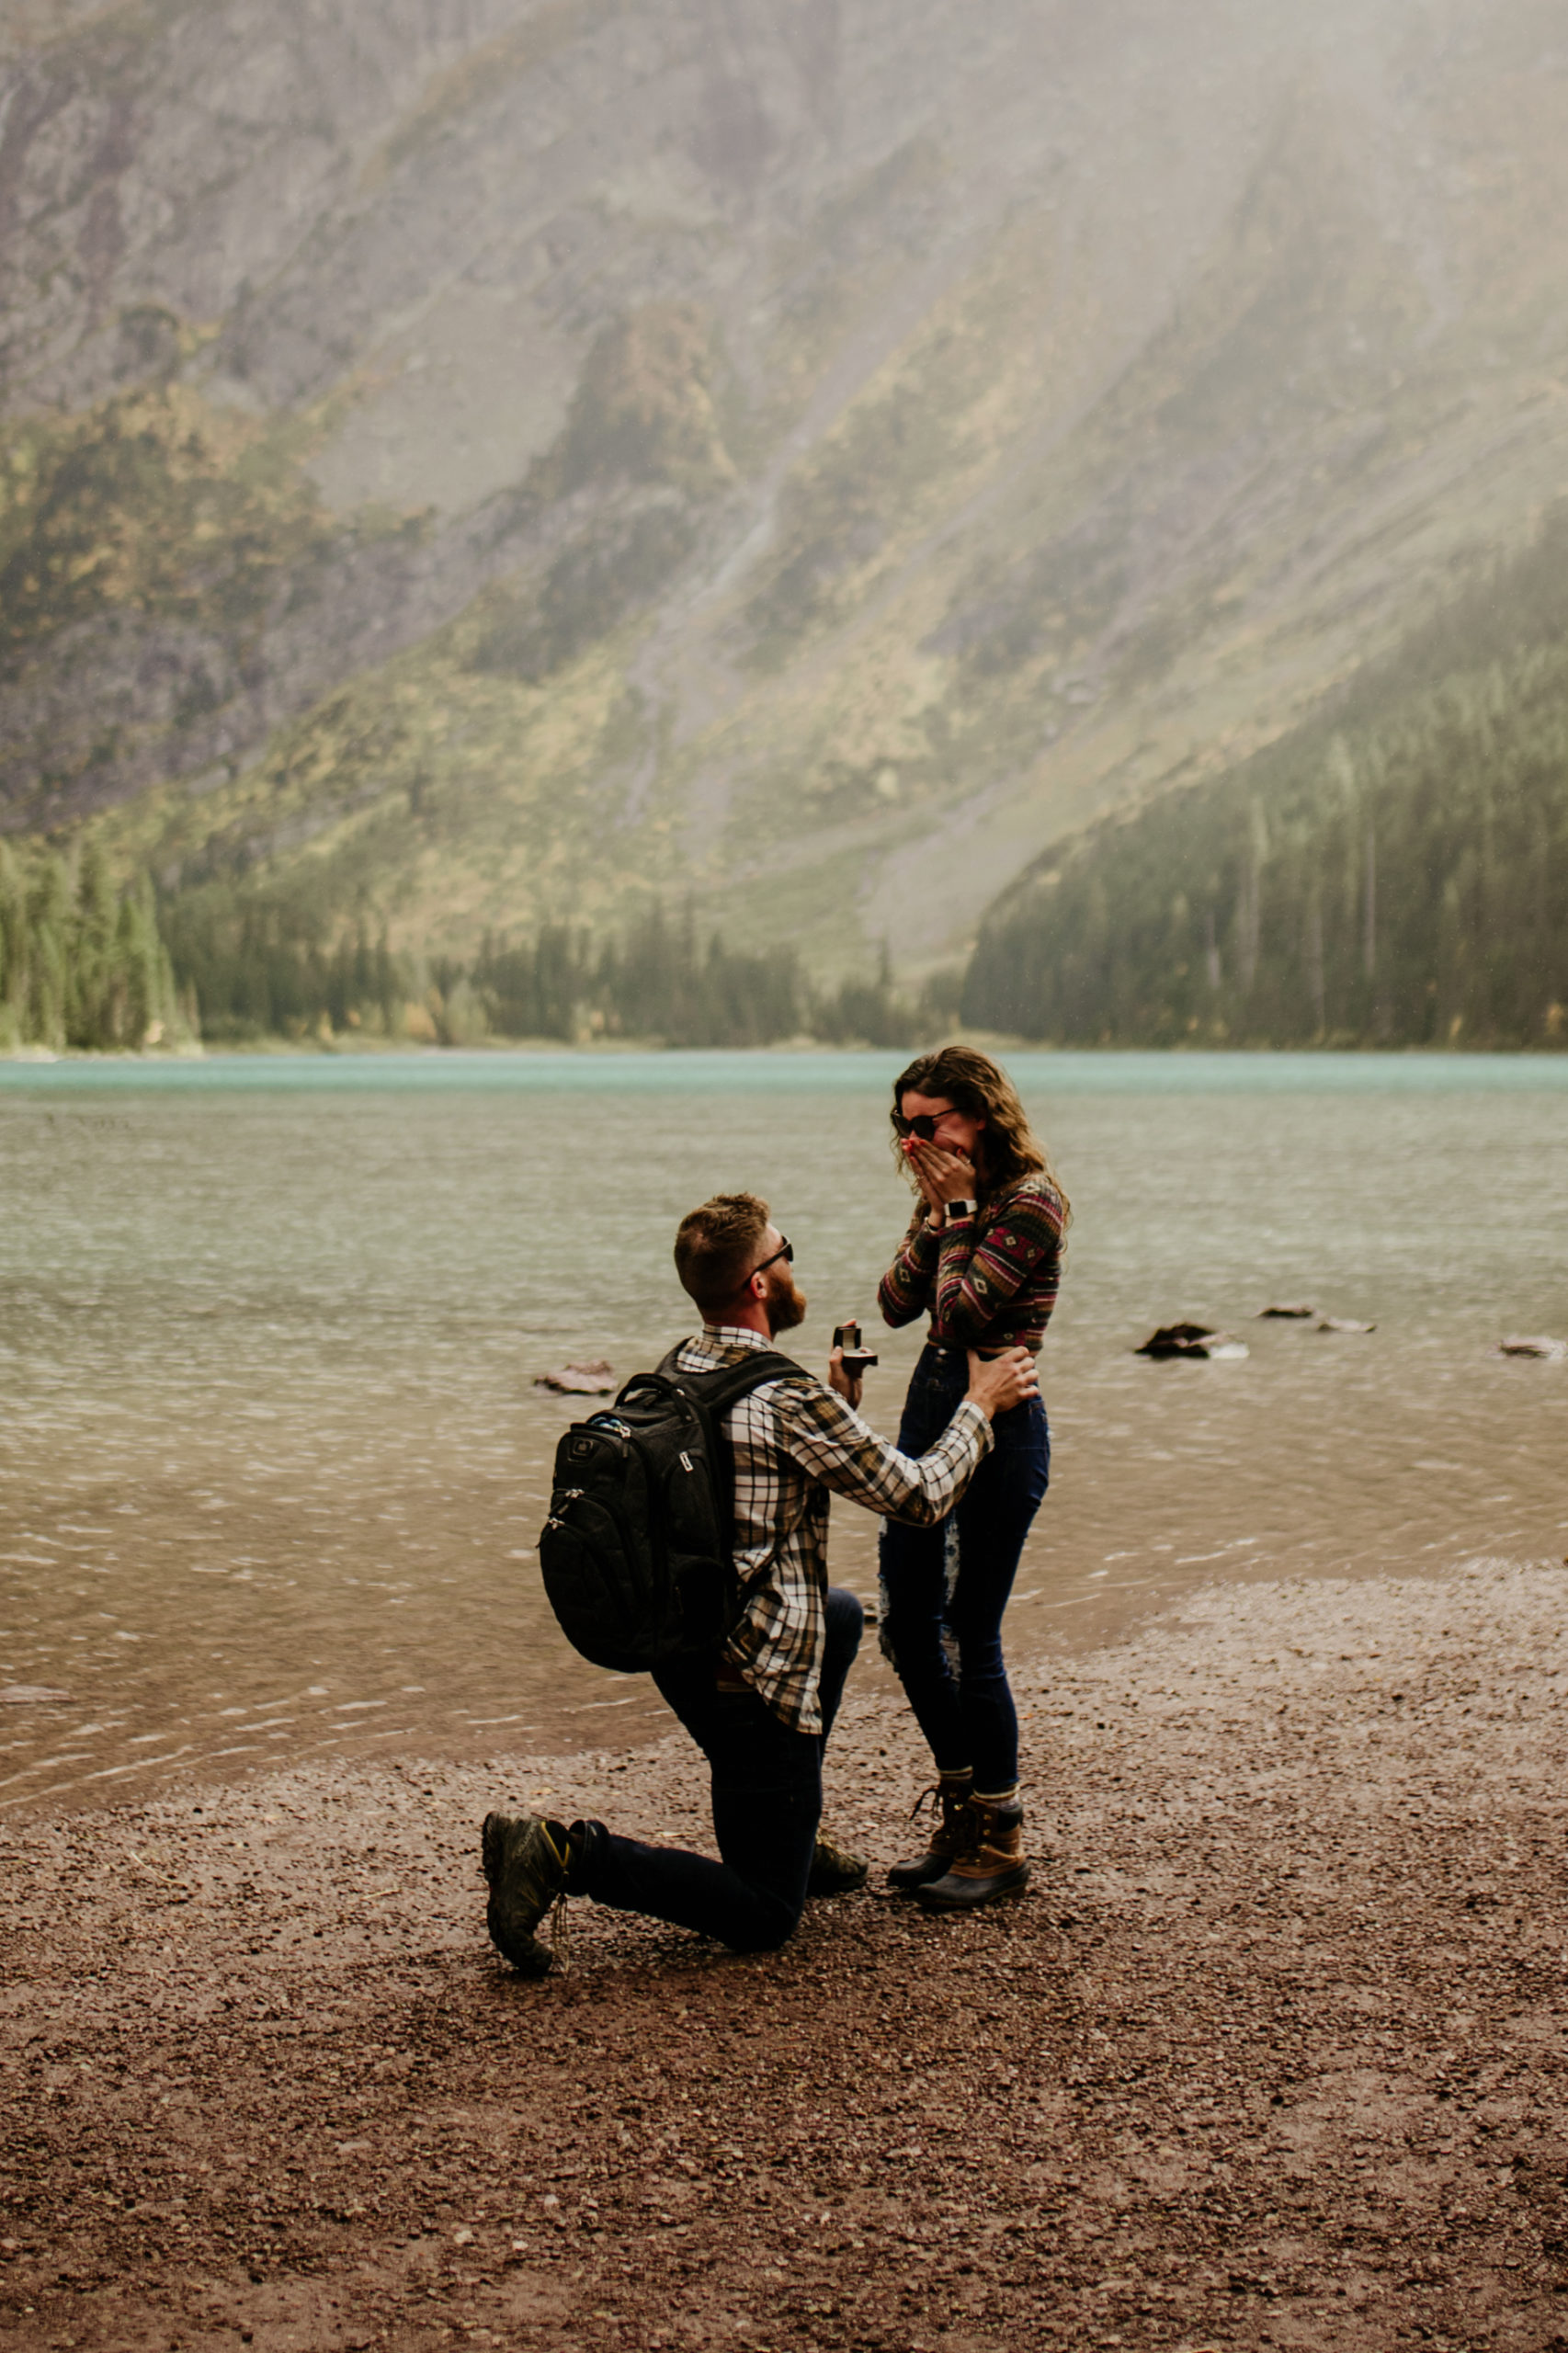 Hiking Surprise Proposal! When you’re gearing up to create that once in a lifetime moment, the one where you ask your favorite person to marry you, we know you have a LOT going through your mind. We are here to break down our six tips for how to have an adventurous hiking surprise proposal. 